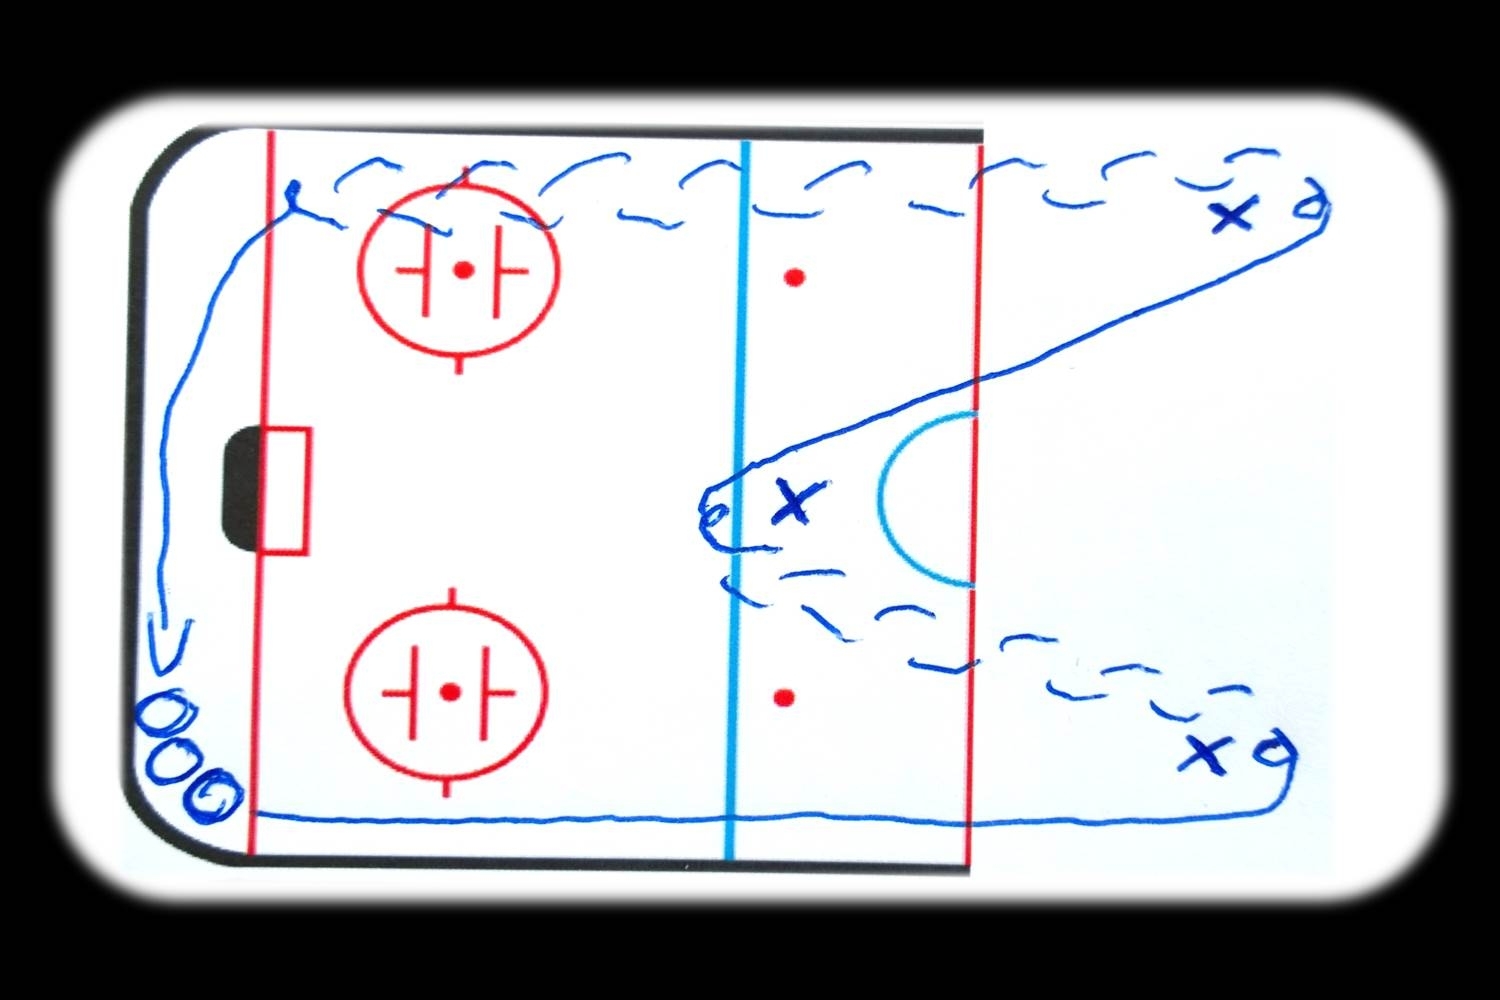 Hockey Drills For 10 Year Olds Hockey Practices And Drills Regarding Blank Hockey Practice Plan Template